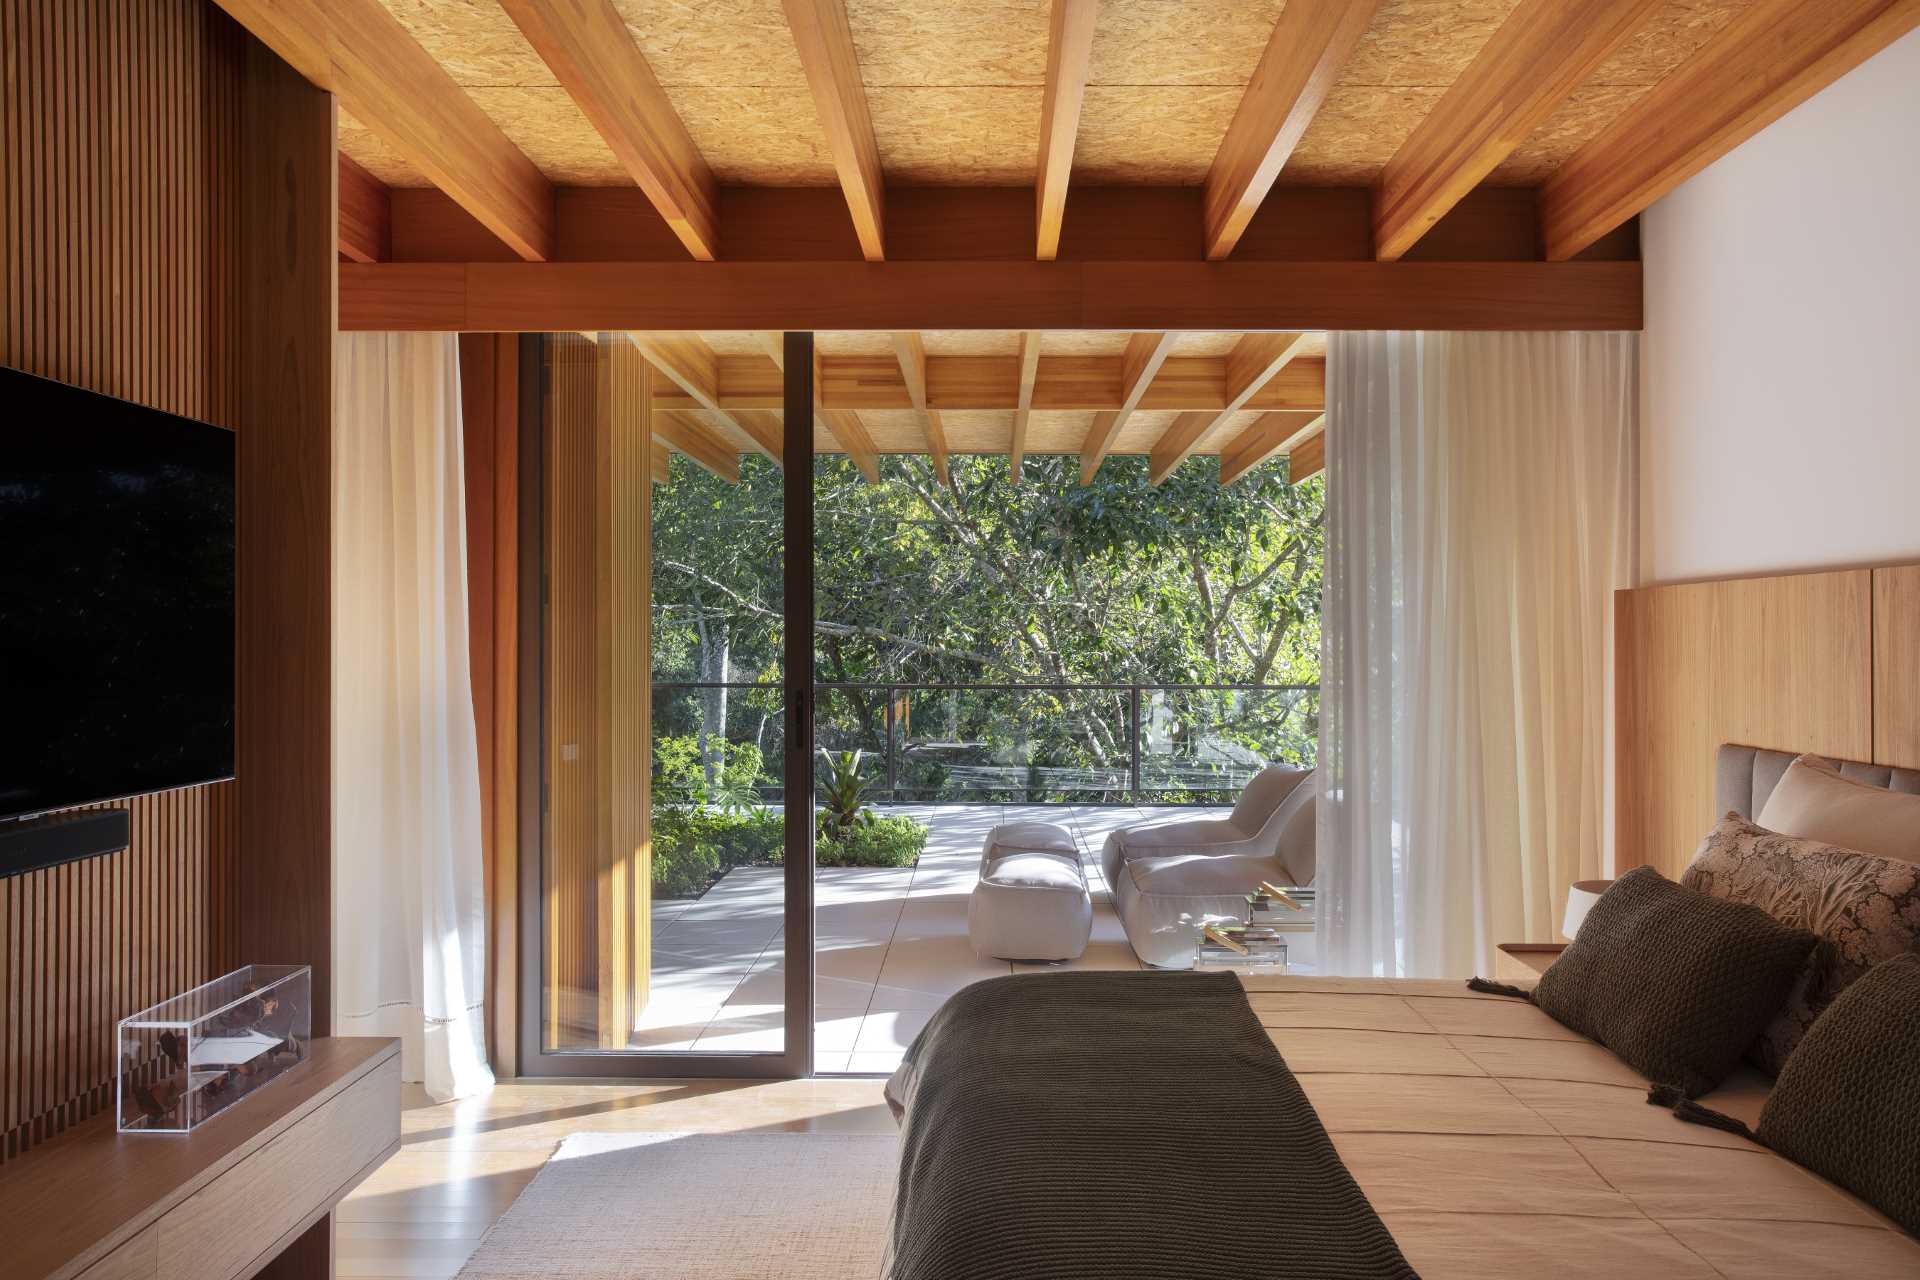 In this modern bedrooms, a sliding glass door opens the room to a balcony that's covered by the overhanging roof.